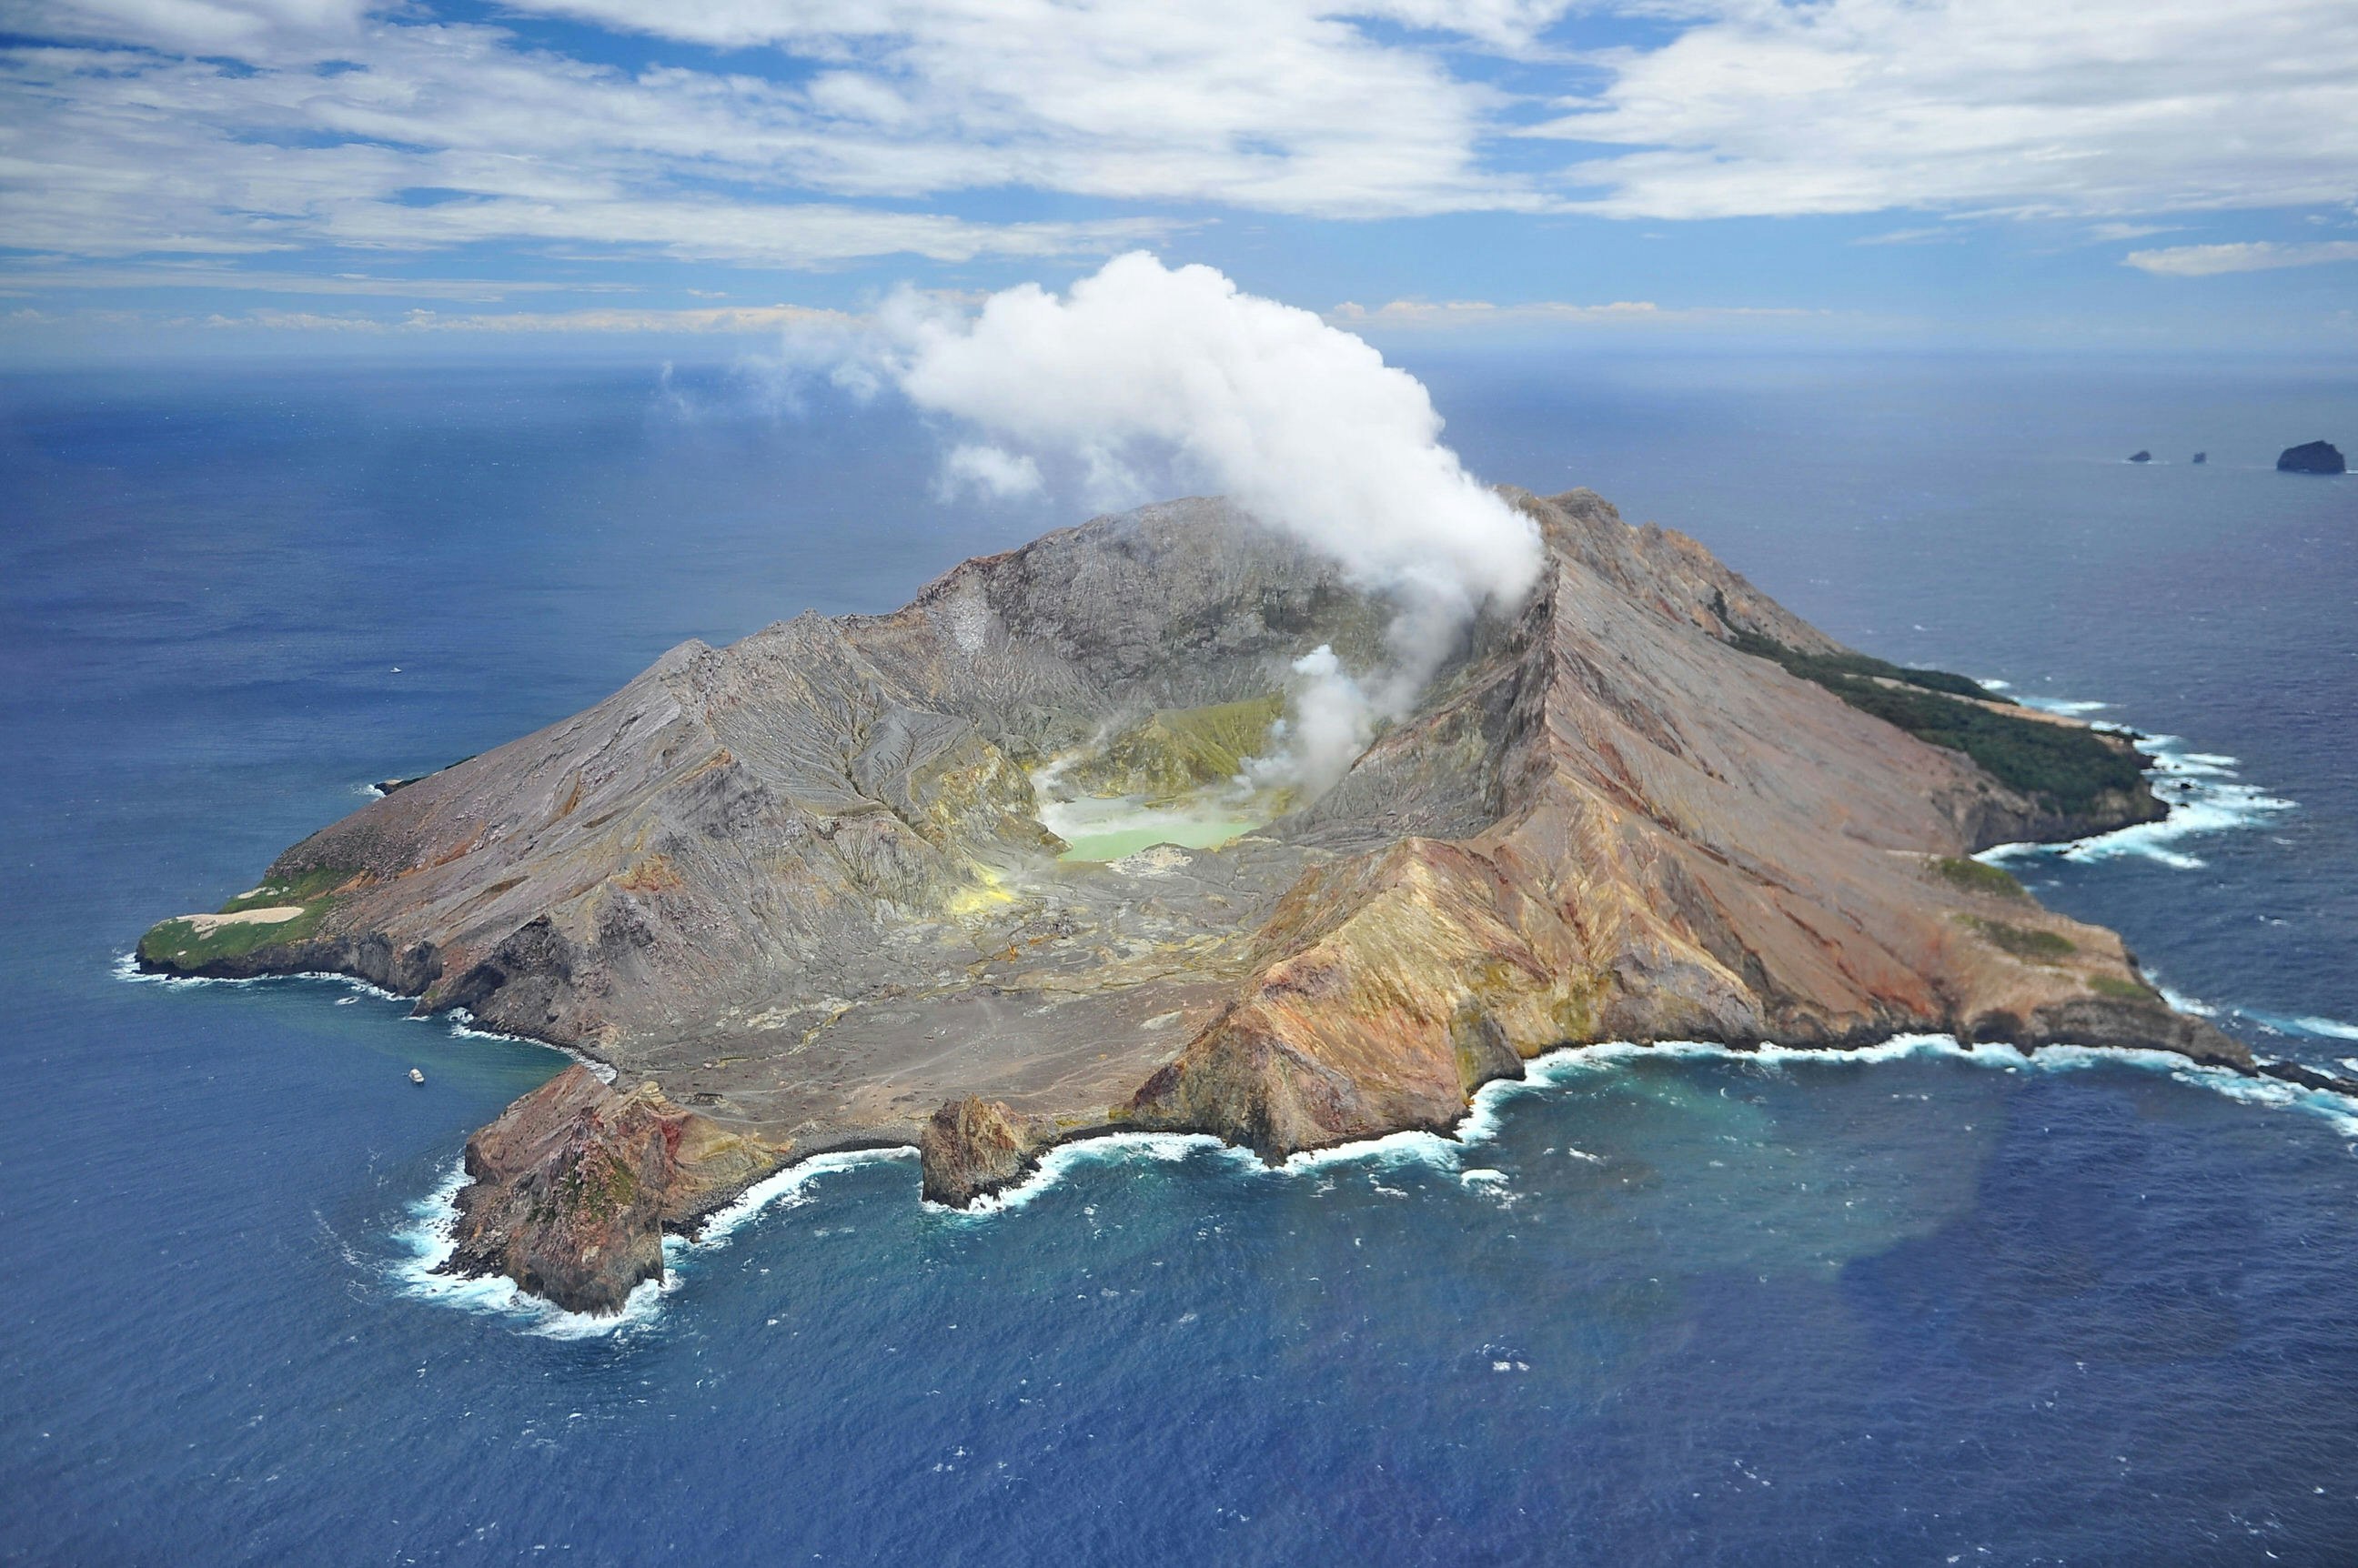 An aerial view of a craggy, volcanic island. There is steam rising from the top, and a green crater lake in the middle. The island is surrounded by dark blue sea.